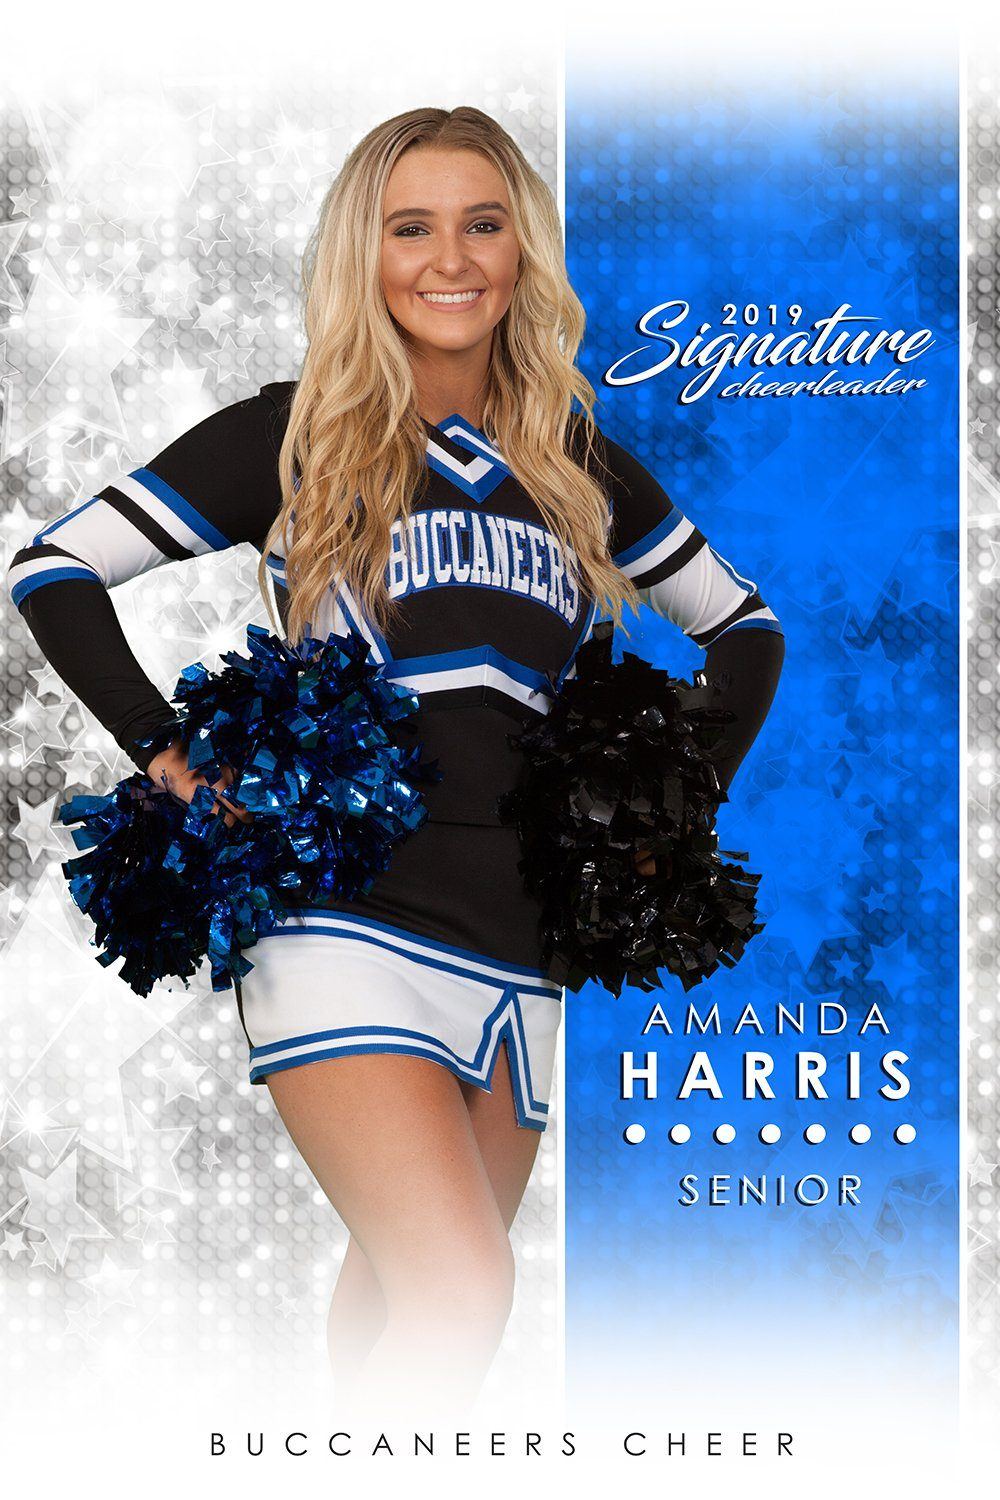 Cheer - v.1 - Signature Player - V Poster/Banner-Photoshop Template - Photo Solutions